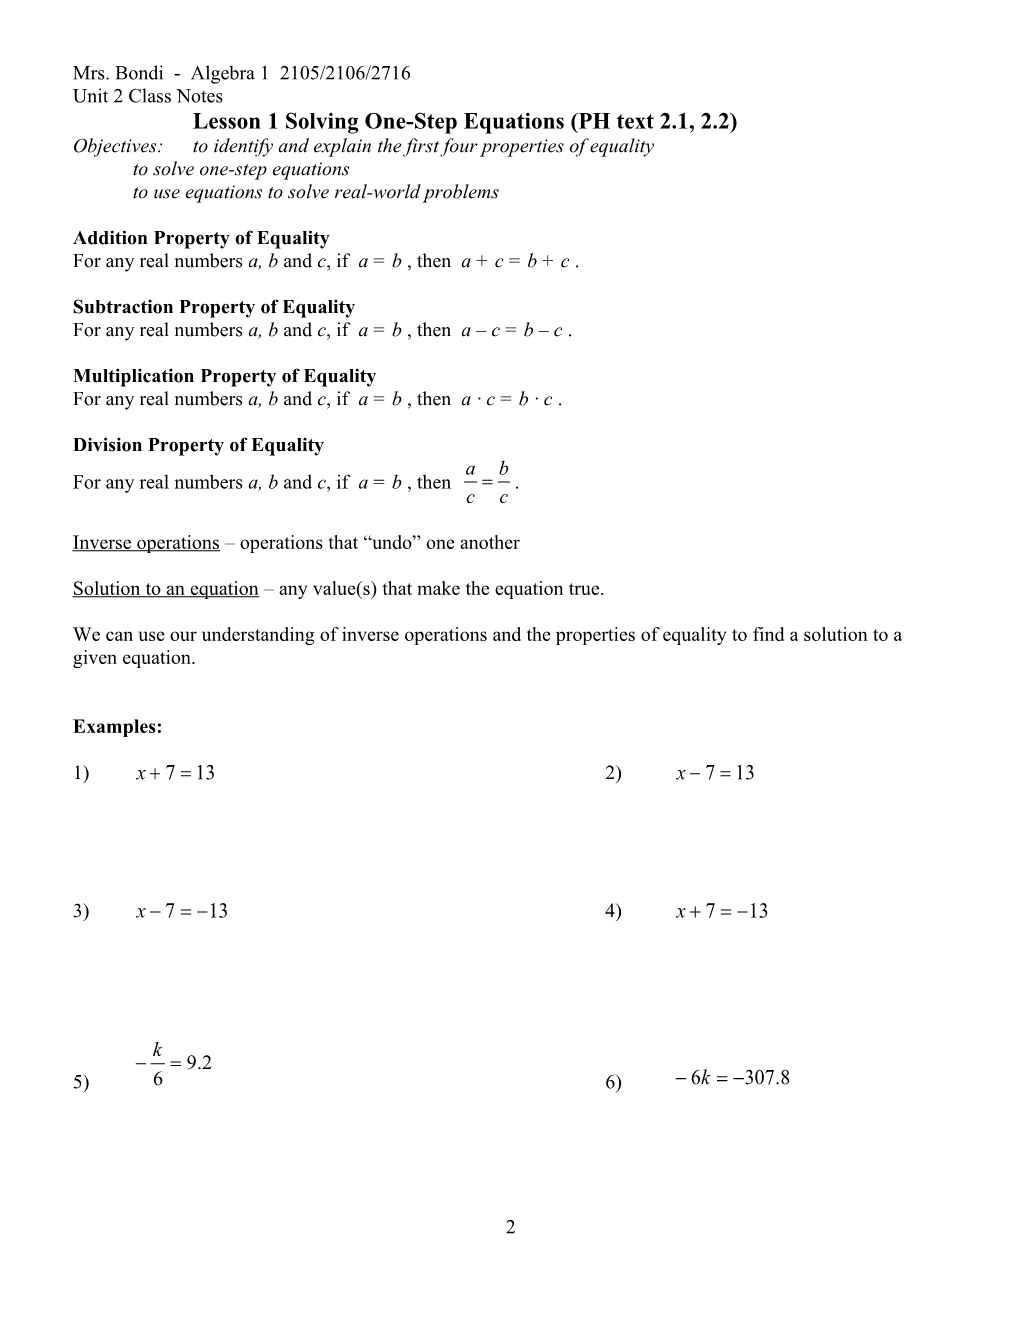 Lesson 1 Solving One-Step Equations (PH Text 2.1, 2.2)